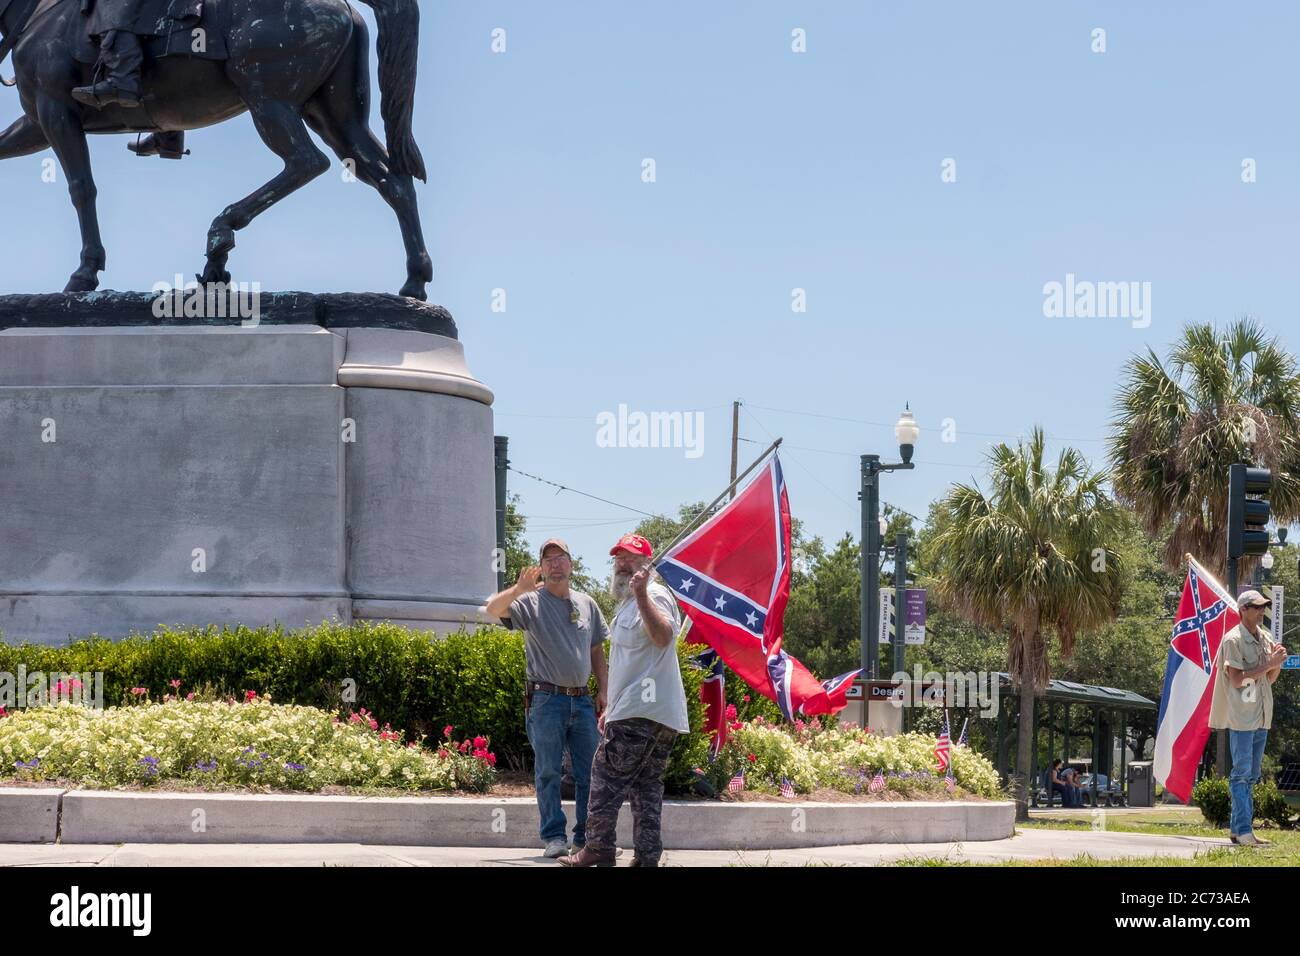 New Orleans, Louisiana/USA-May 7, 2017: Demonstrators at the Beauregard Statue Protesting the Removal of Confederate Statues Stock Photo